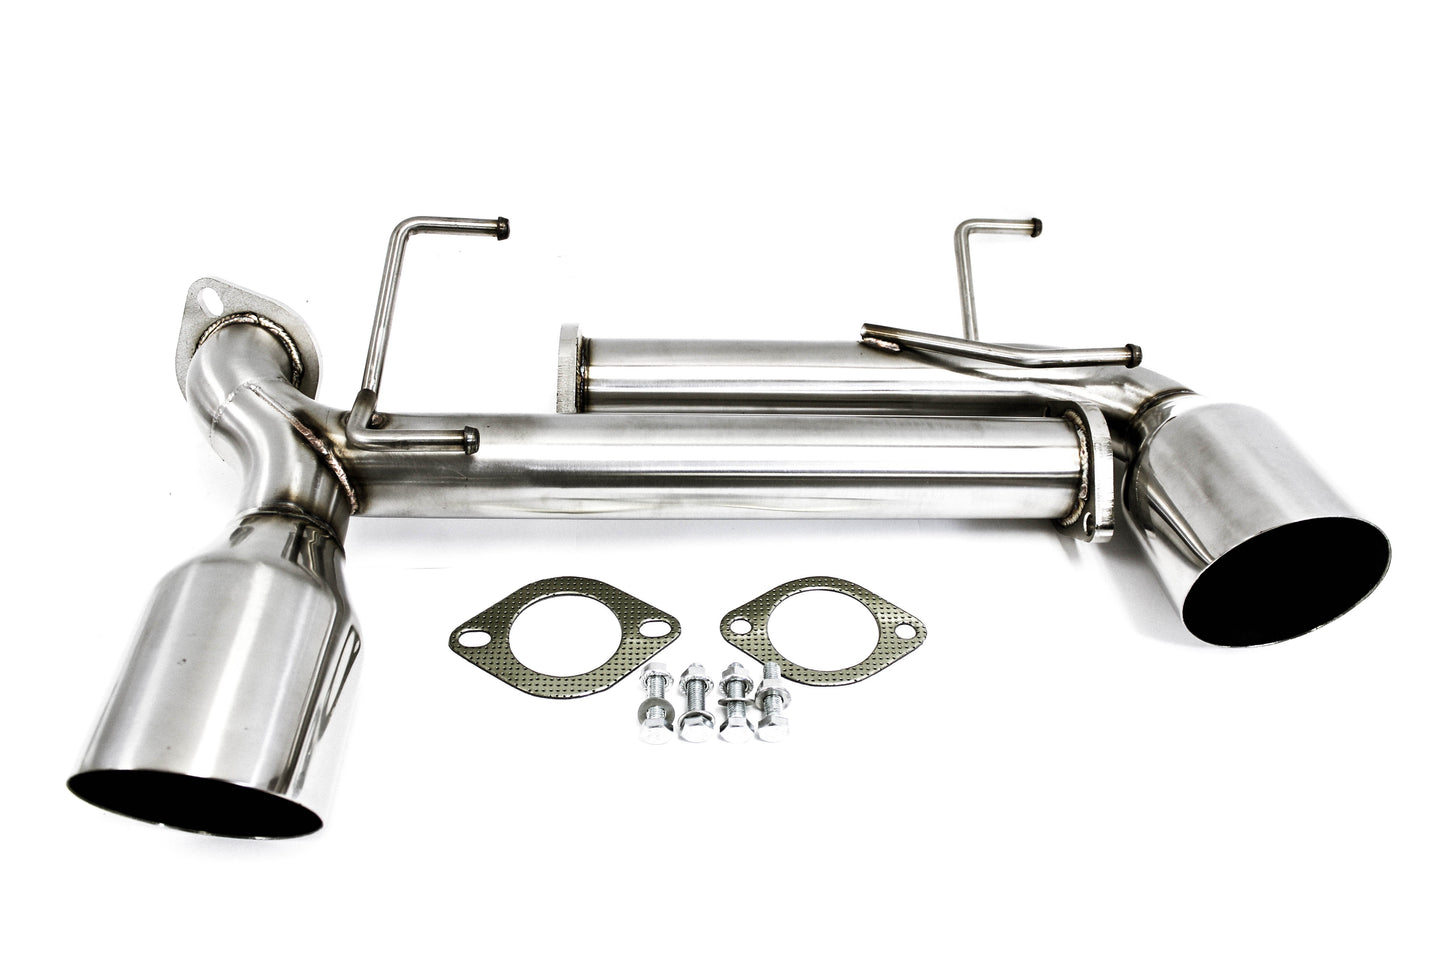 PLM - Power Driven FR-S BRZ Muffler Delete with Dual Tips 2012 - 2016